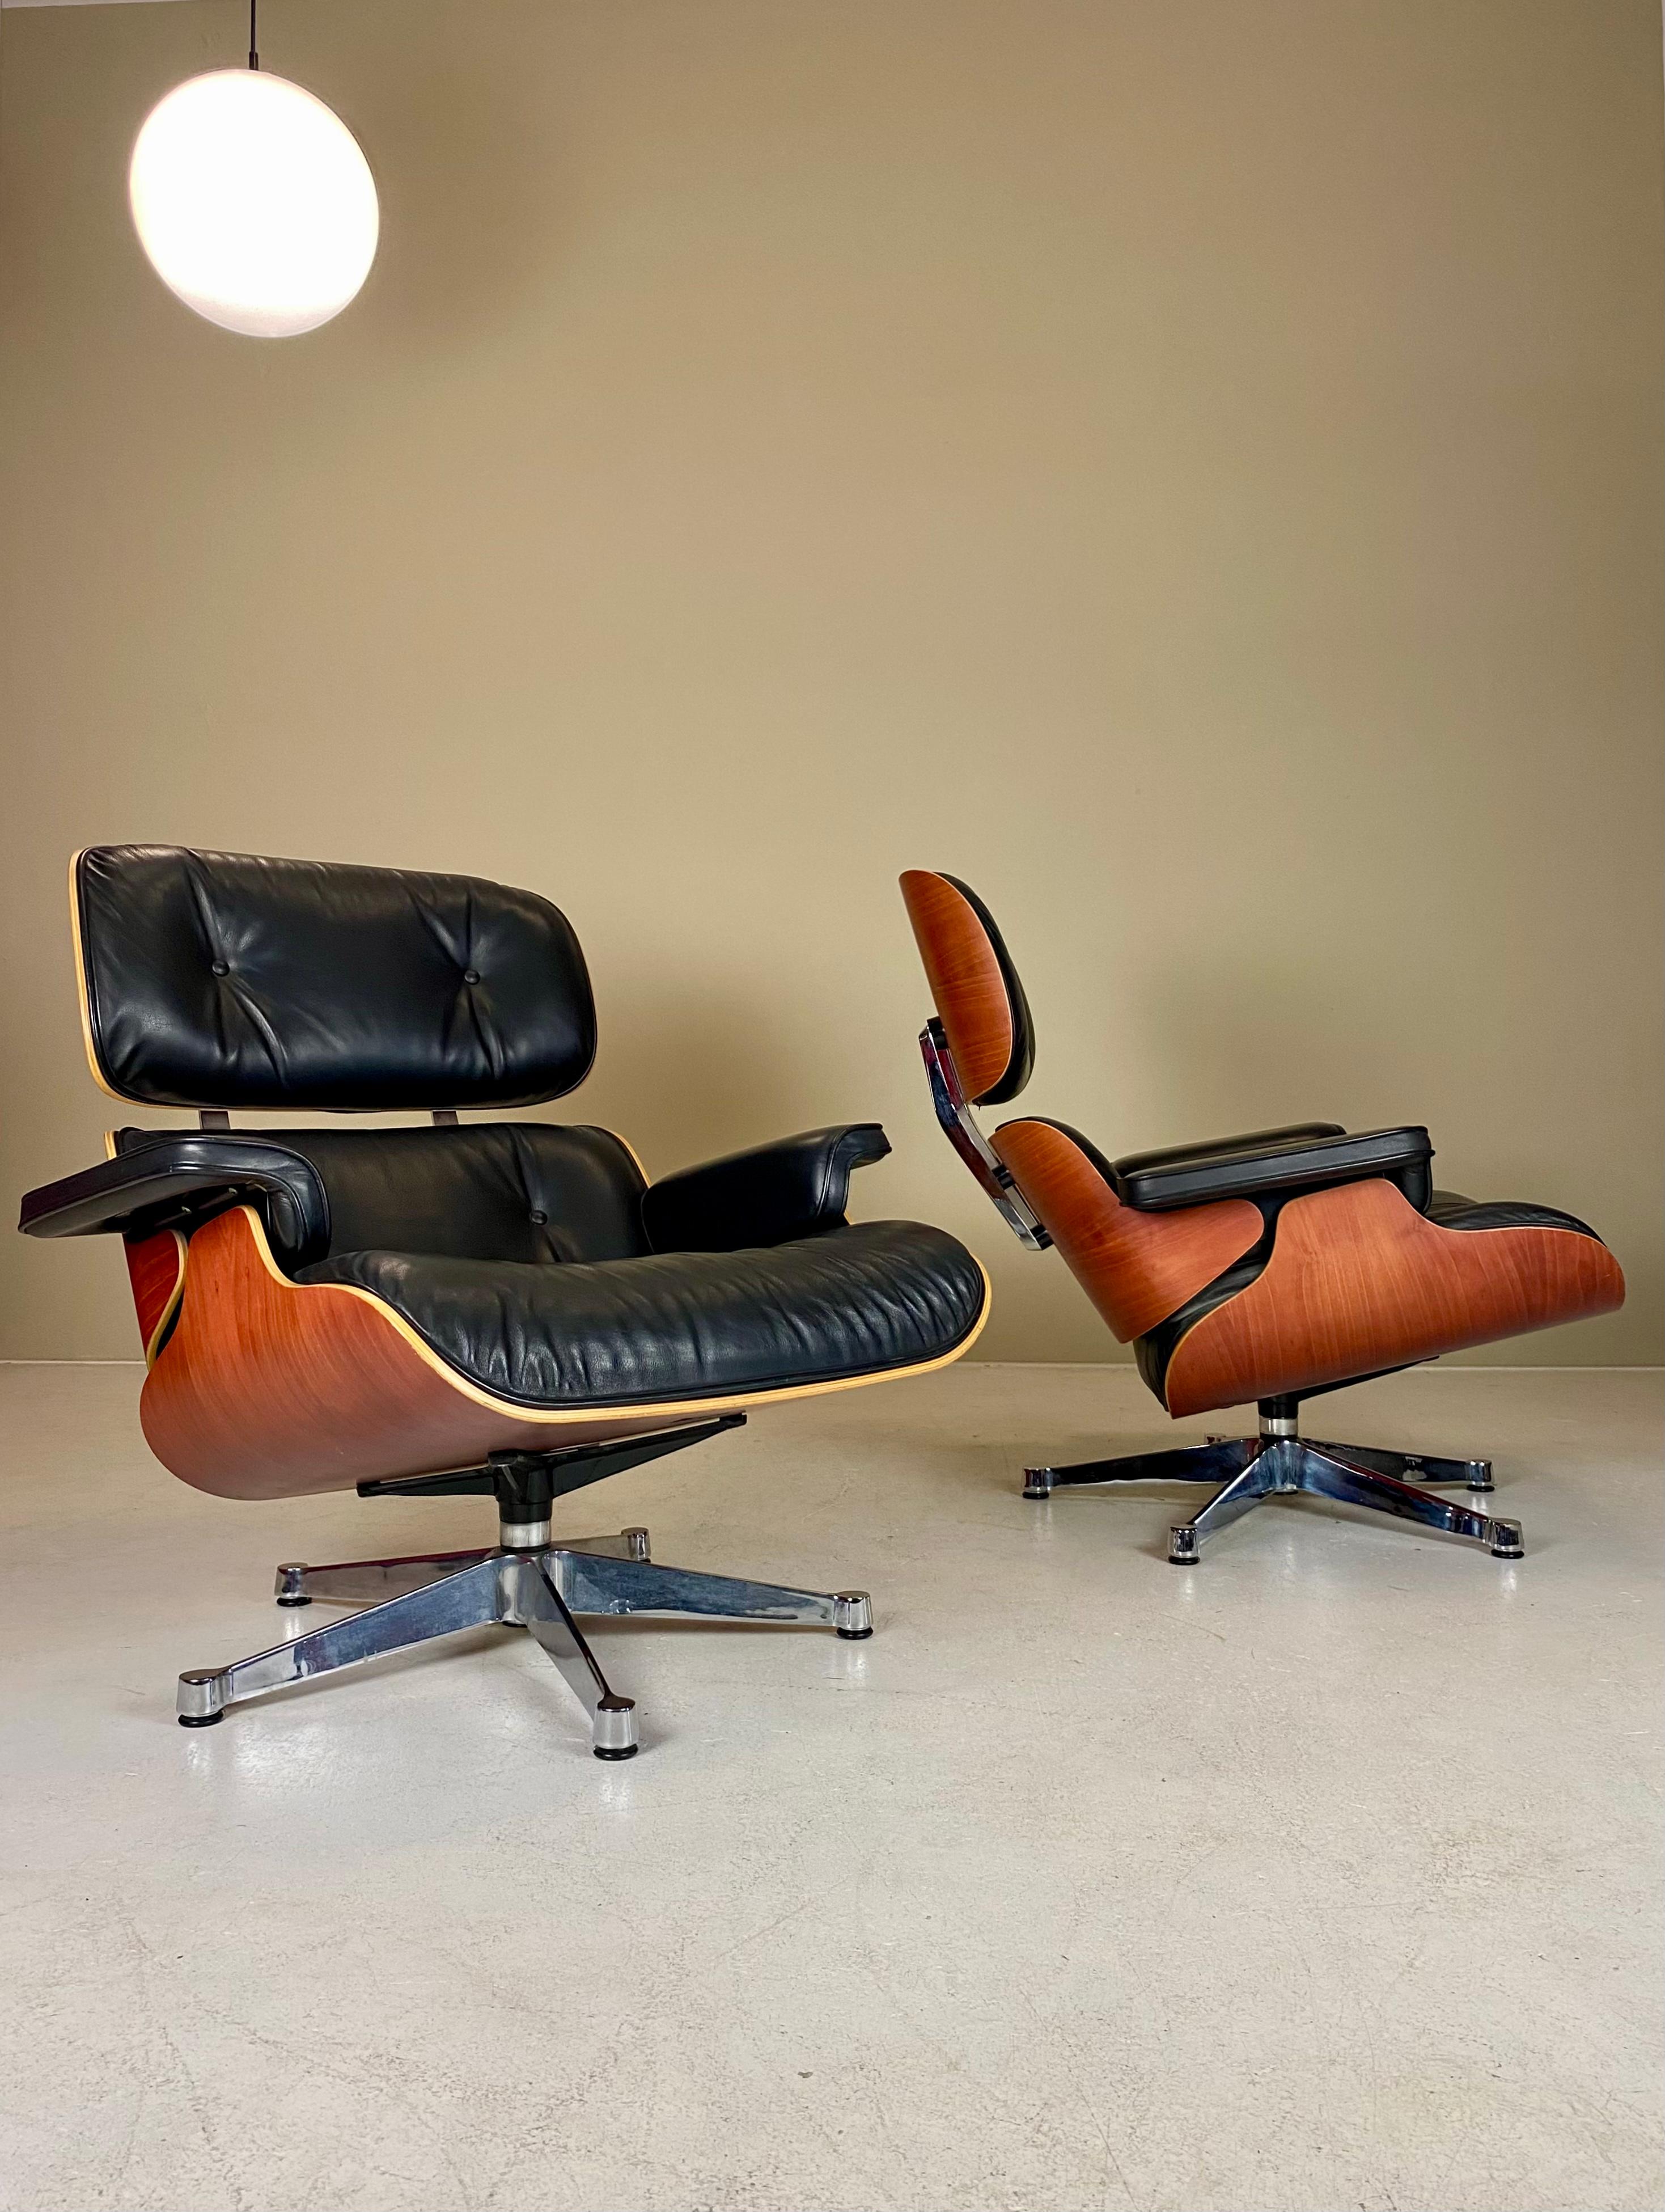 For sale is a lovely set of two iconic Vitra 671 Lounge Chairs, designed by Charles and Ray Eames in 1956. The Eames’ wanted to create a spacious armchair that combines ergonomics — the chair should fit like a baseball glove — with high-quality